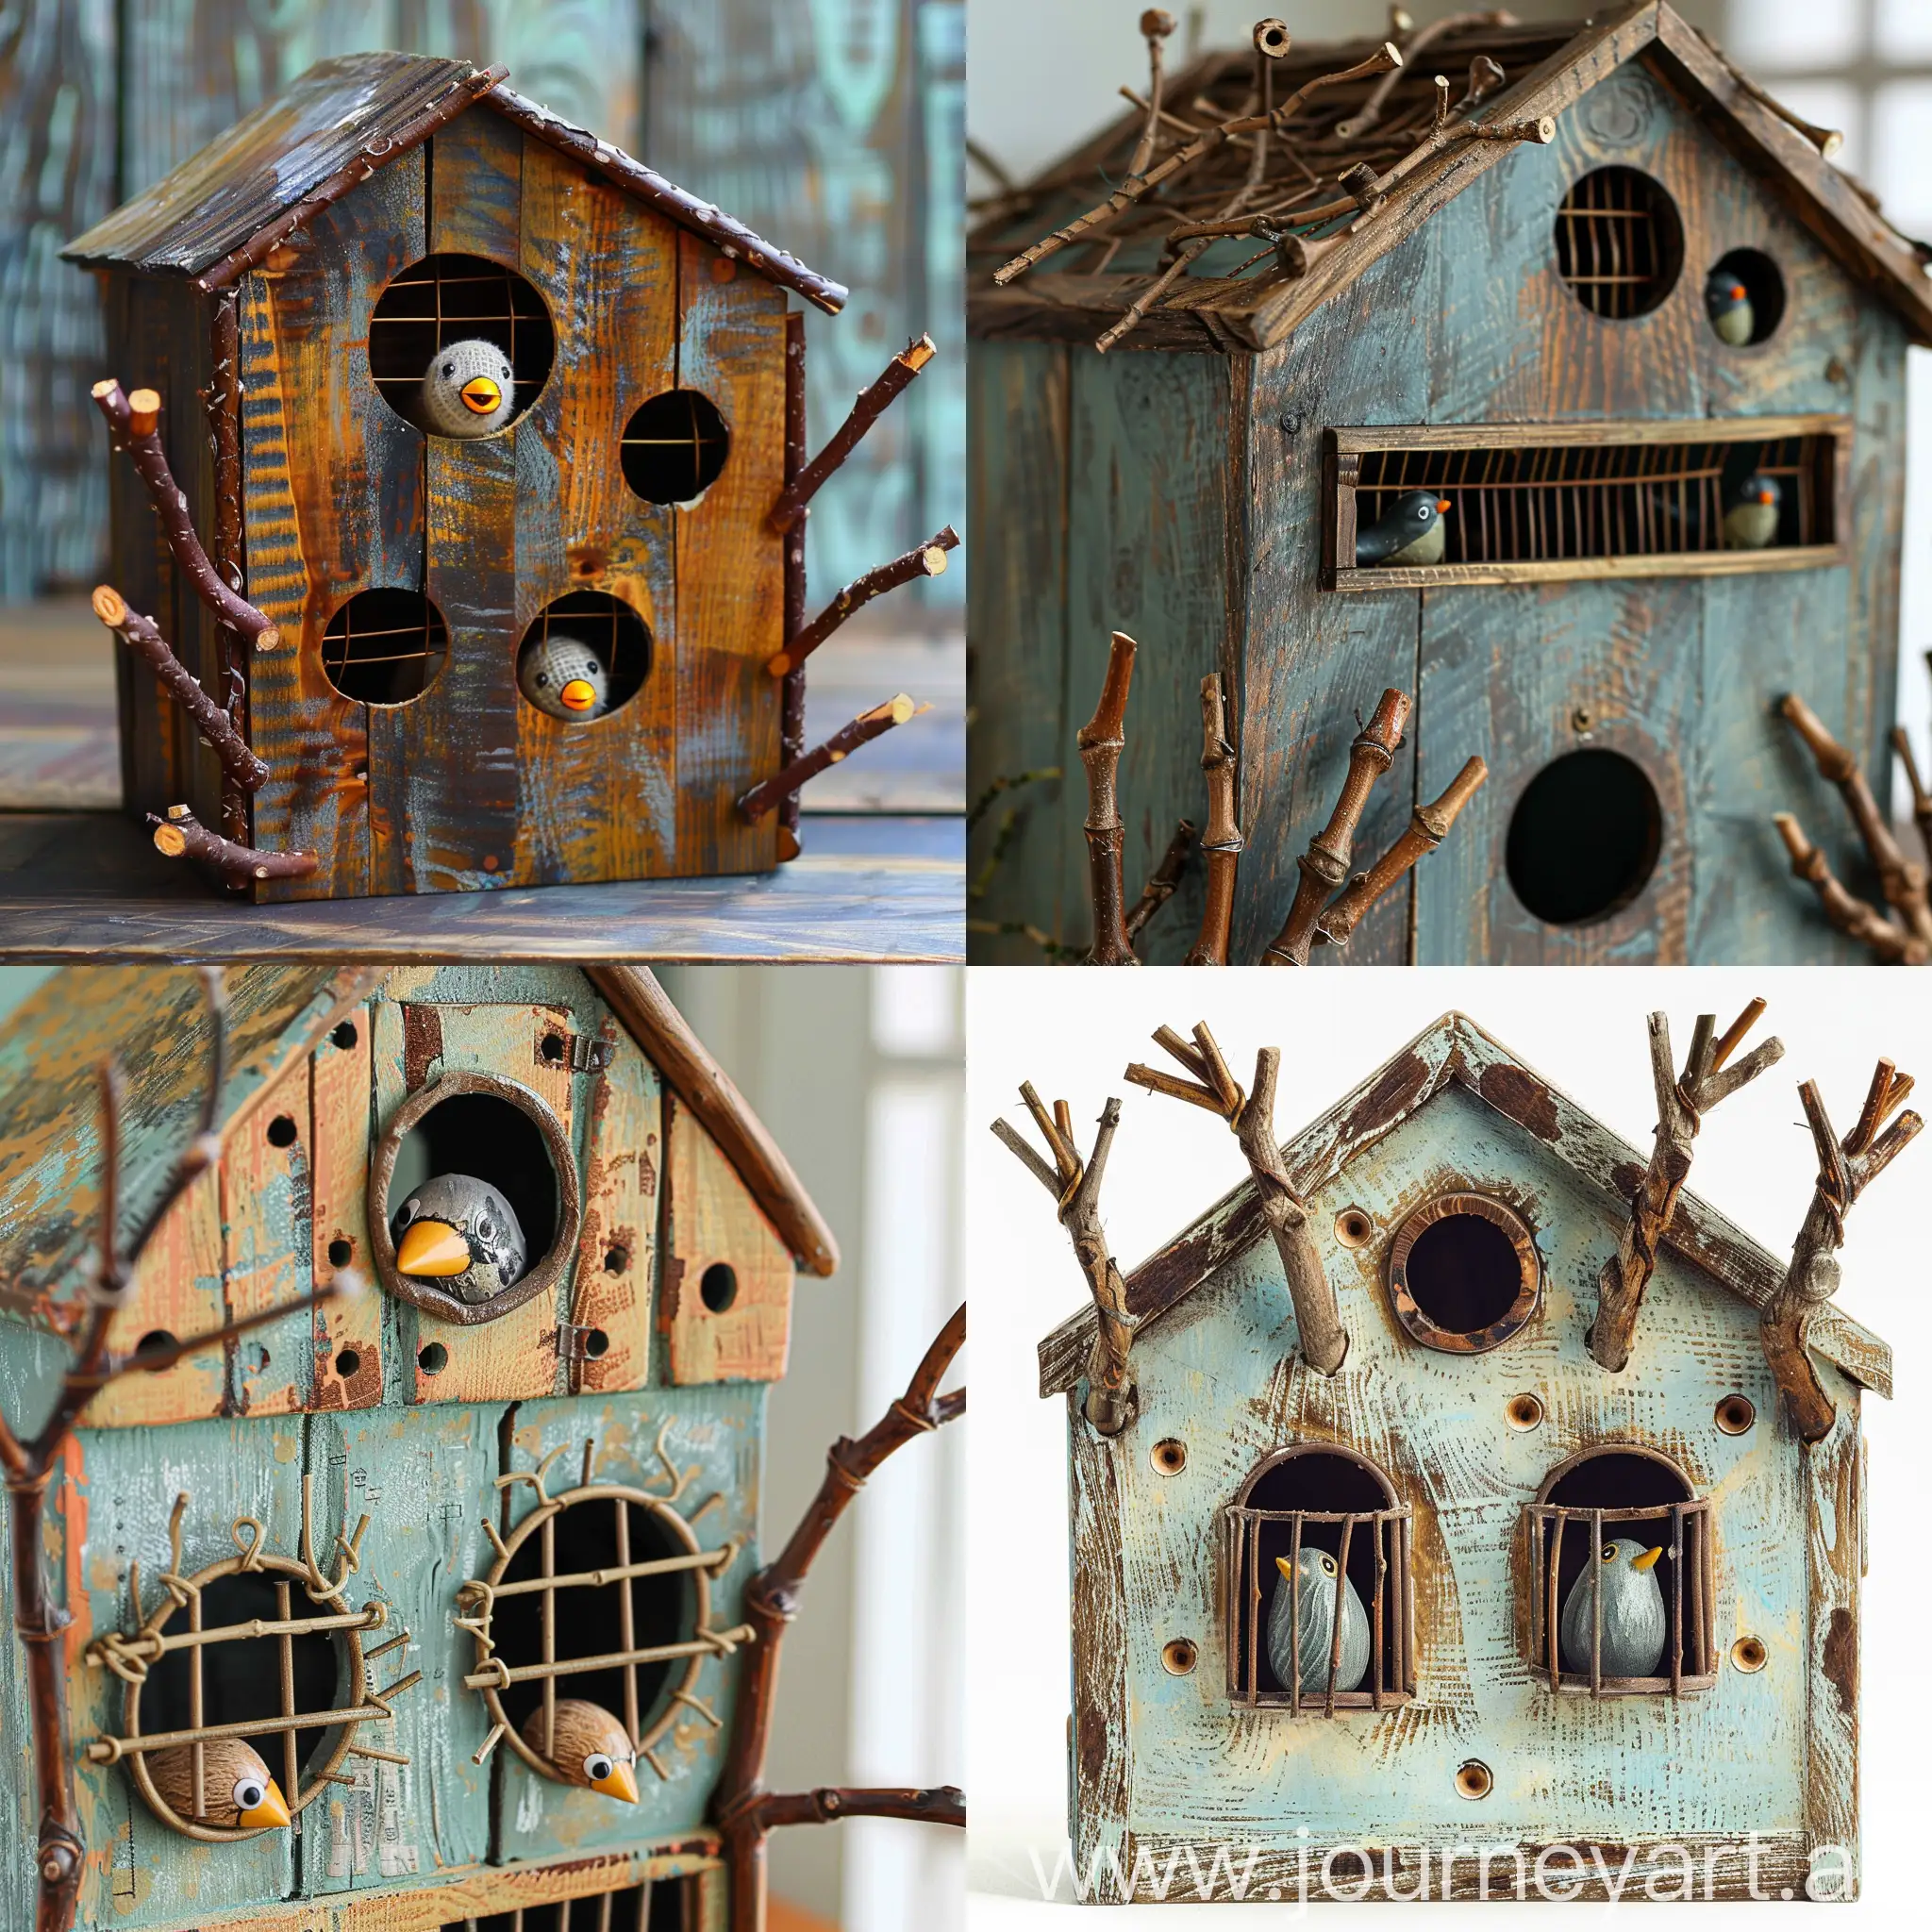 House-shaped birdcage made of wood with vintage twig hands, windows and holes, two birds peeking out of the holes, twig arms outstretched (focus), simple image pattern, hand drawn, Easter colors, abstract, cheerful, whimsical, funny, children's storybook style